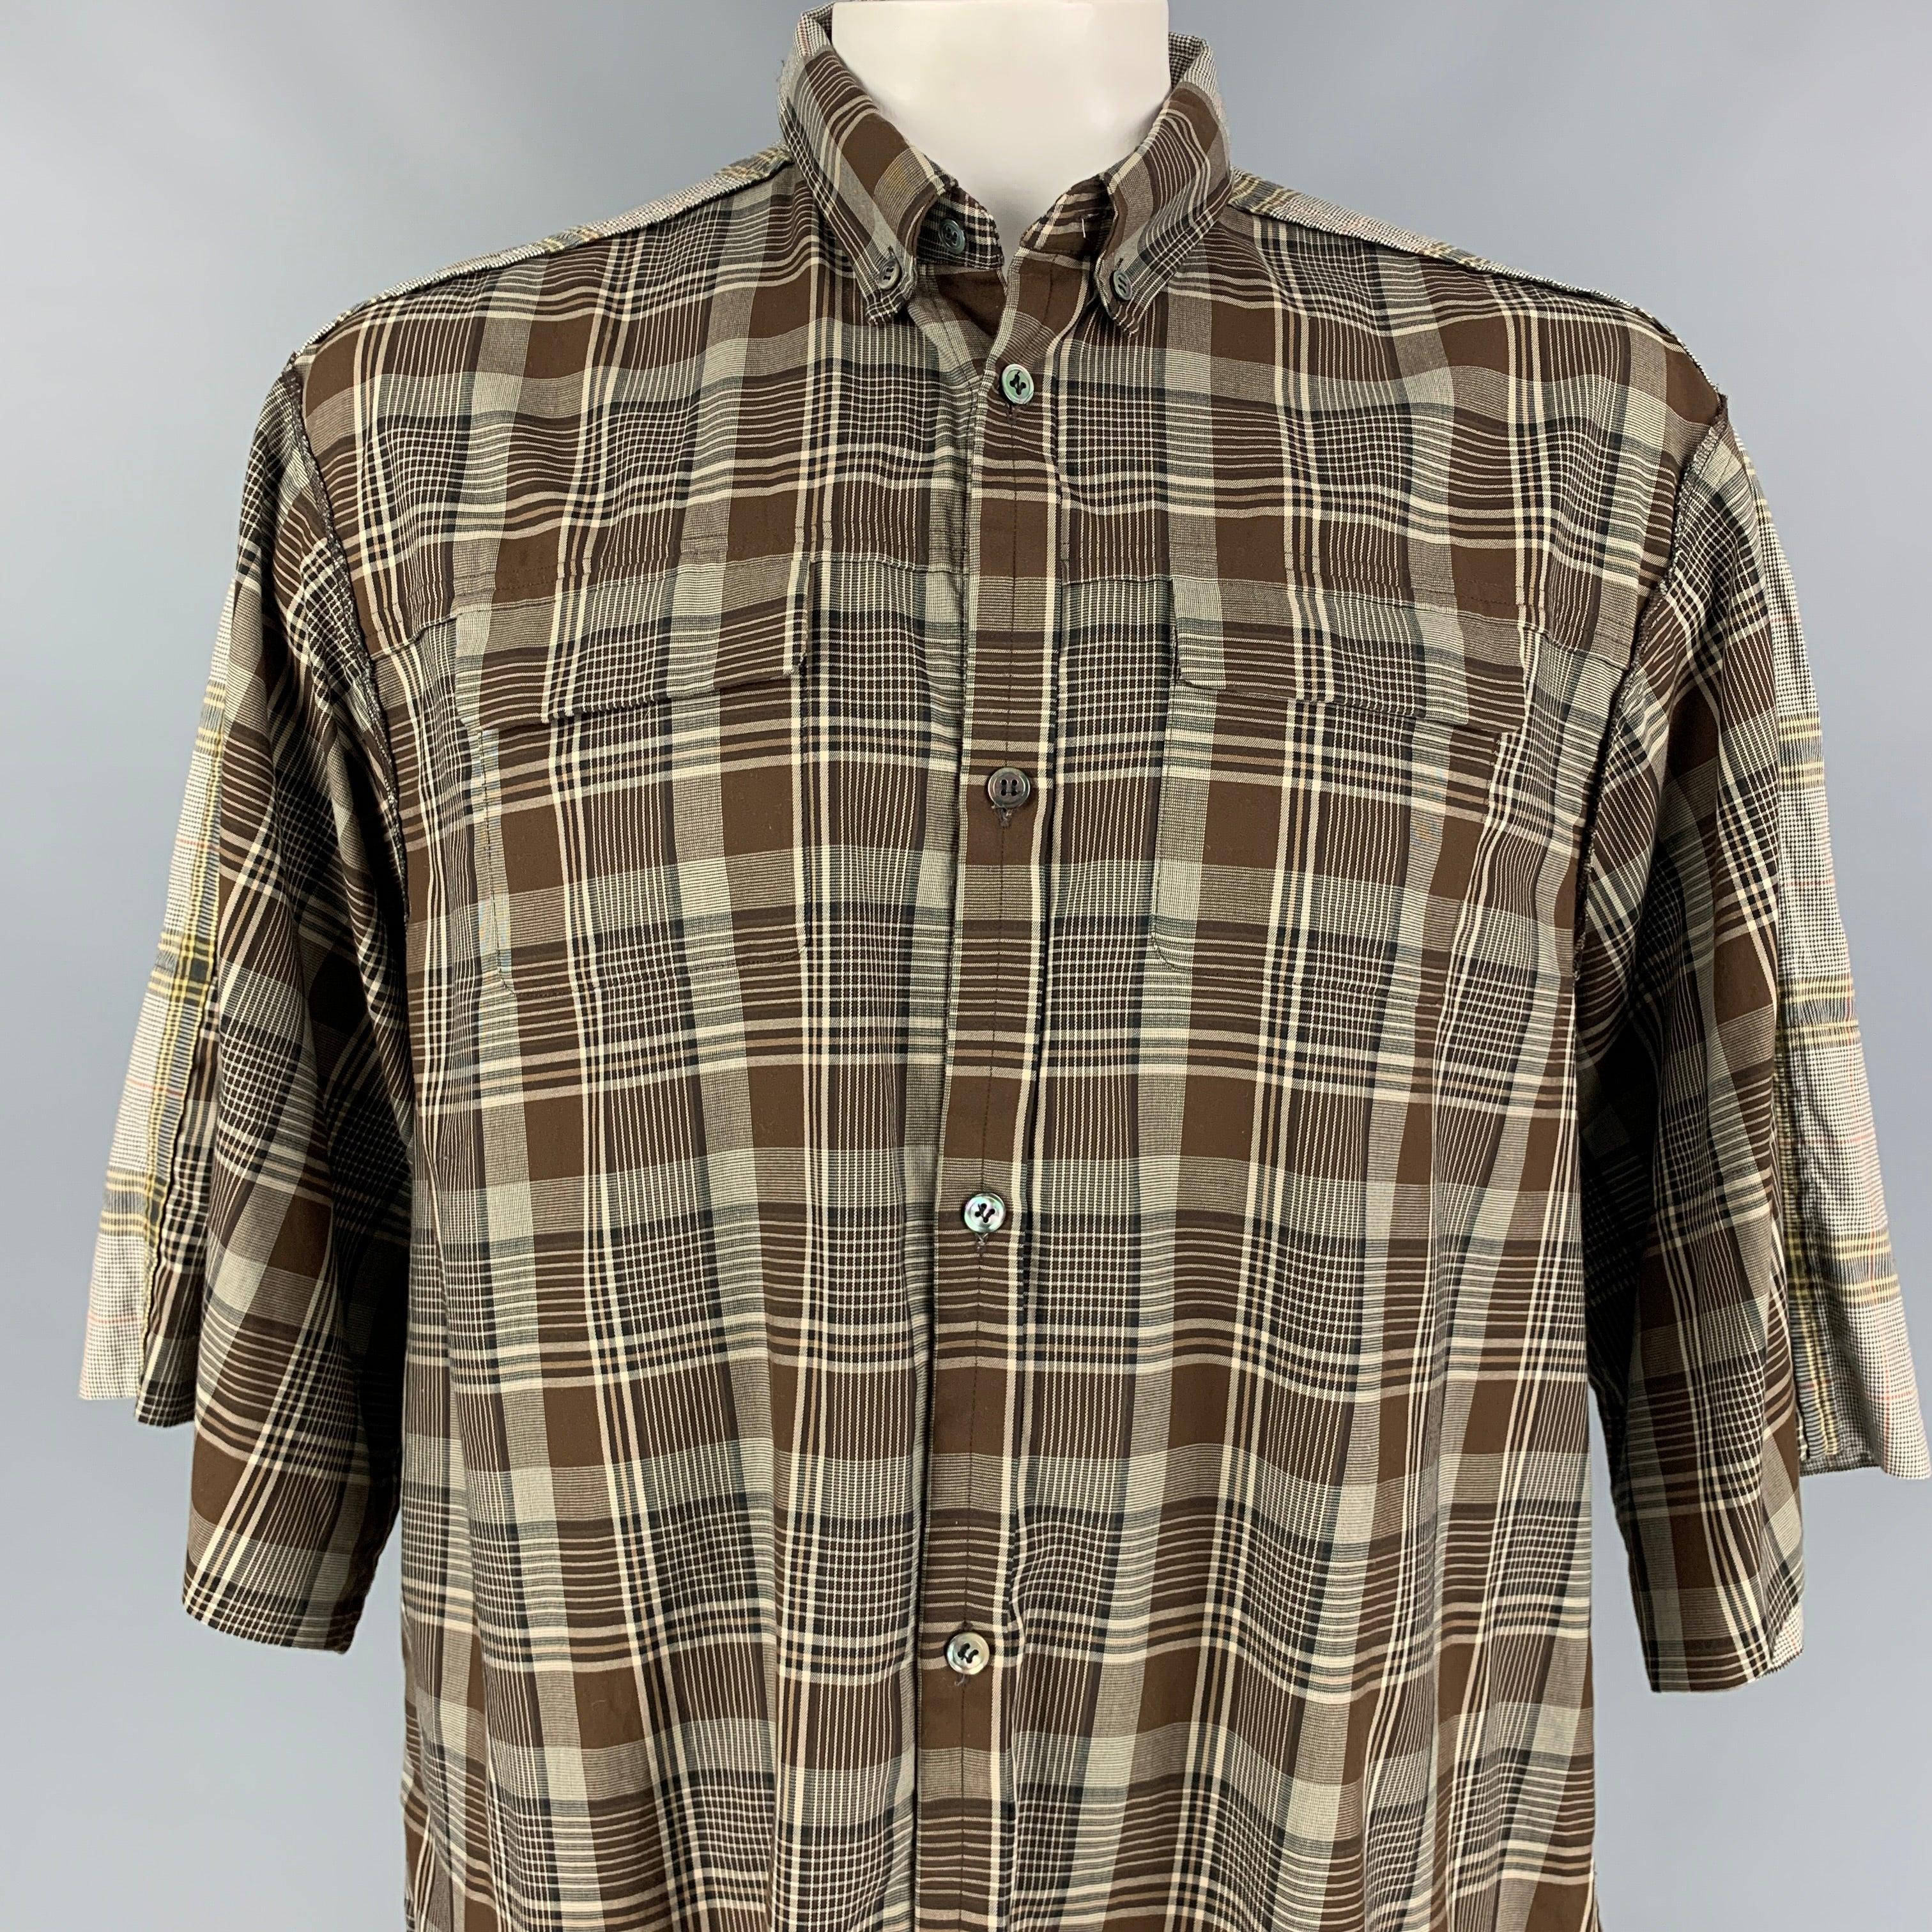 UNDERCOVER short sleeve shirt comes in a brown & olive plaid cotton featuring a oversized fit, reversed seams, front pockets, and a buttoned closure. Made in Japan.
Excellent
Pre-Owned Condition. 

Marked:   5 

Measurements: 
 
Shoulder: 21 inches 